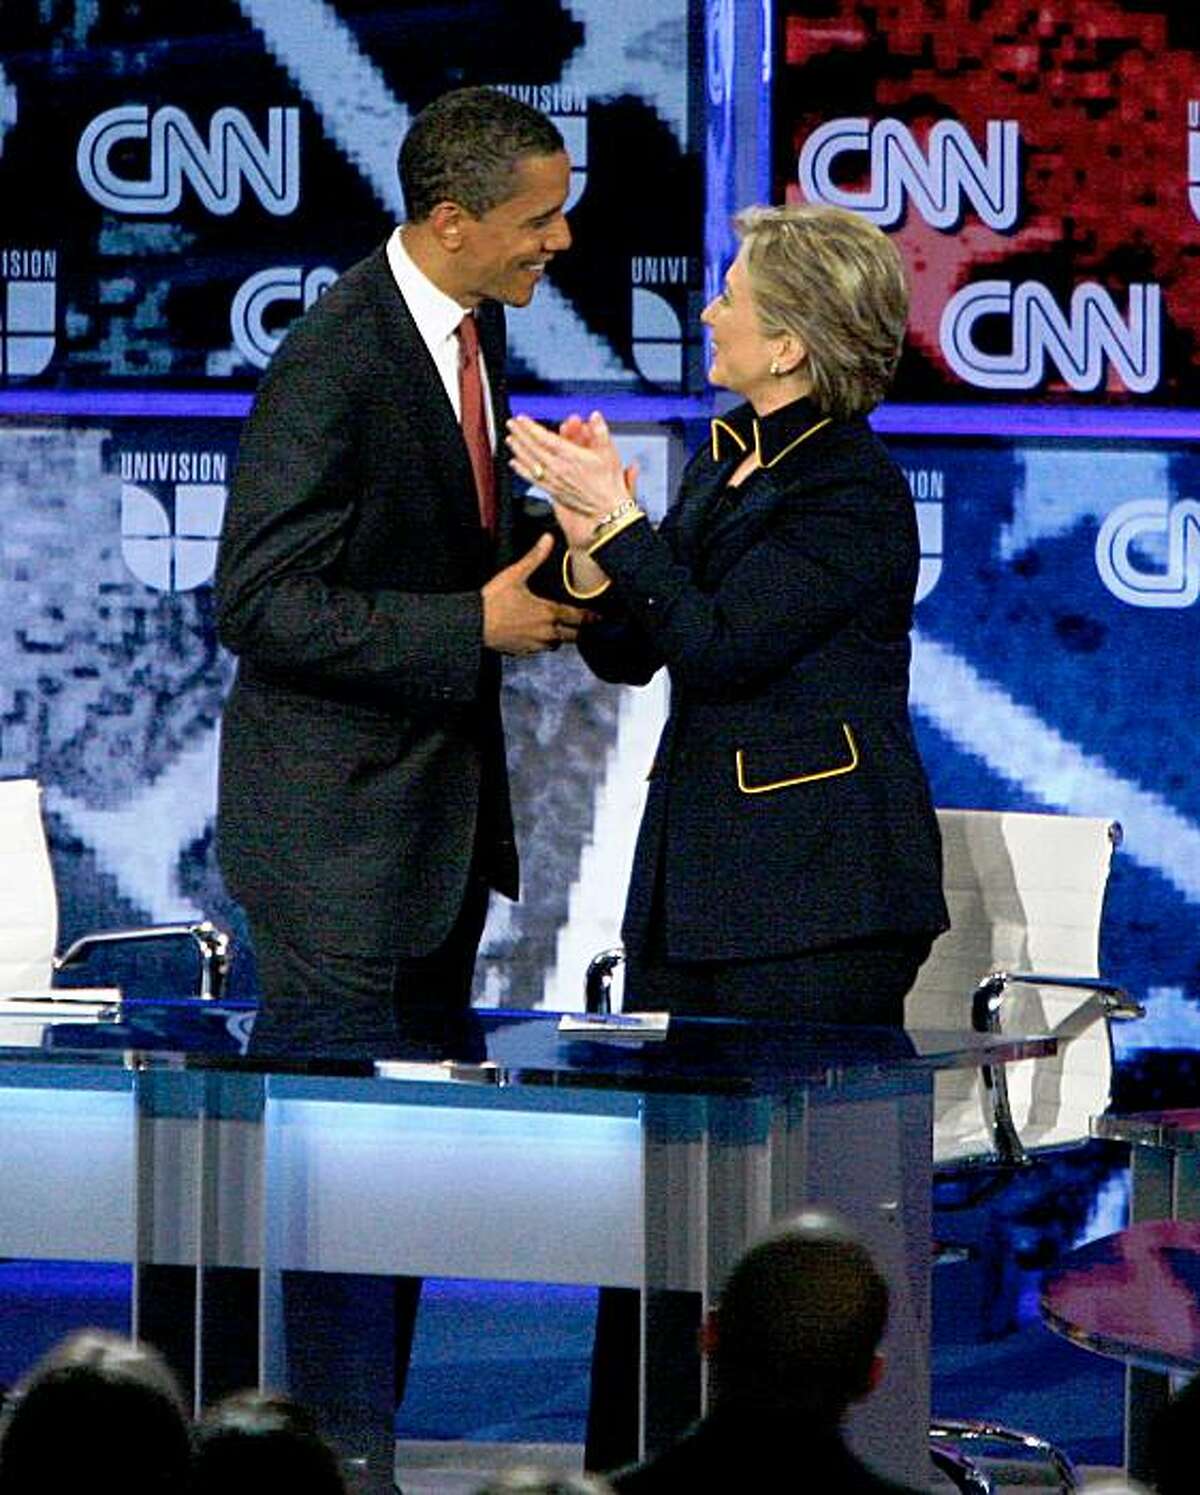 AUSTIN, TX - FEBRUARY 21: Democratic presidential hopefuls U.S. Sen. Barack Obama (D-IL) and U.S. Sen. Hillary Clinton (D-NY) speak after participating in a debate Lyndon B. Johnson Auditorium at the University of Texas on February 21, 2008 in Austin, Texas. The debate was sponsored by the Texas Democratic Party, Univision and CNN and was ahead of the Texas and Ohio primaries being held on March 4th. (Photo by Ben Sklar/Getty Images)